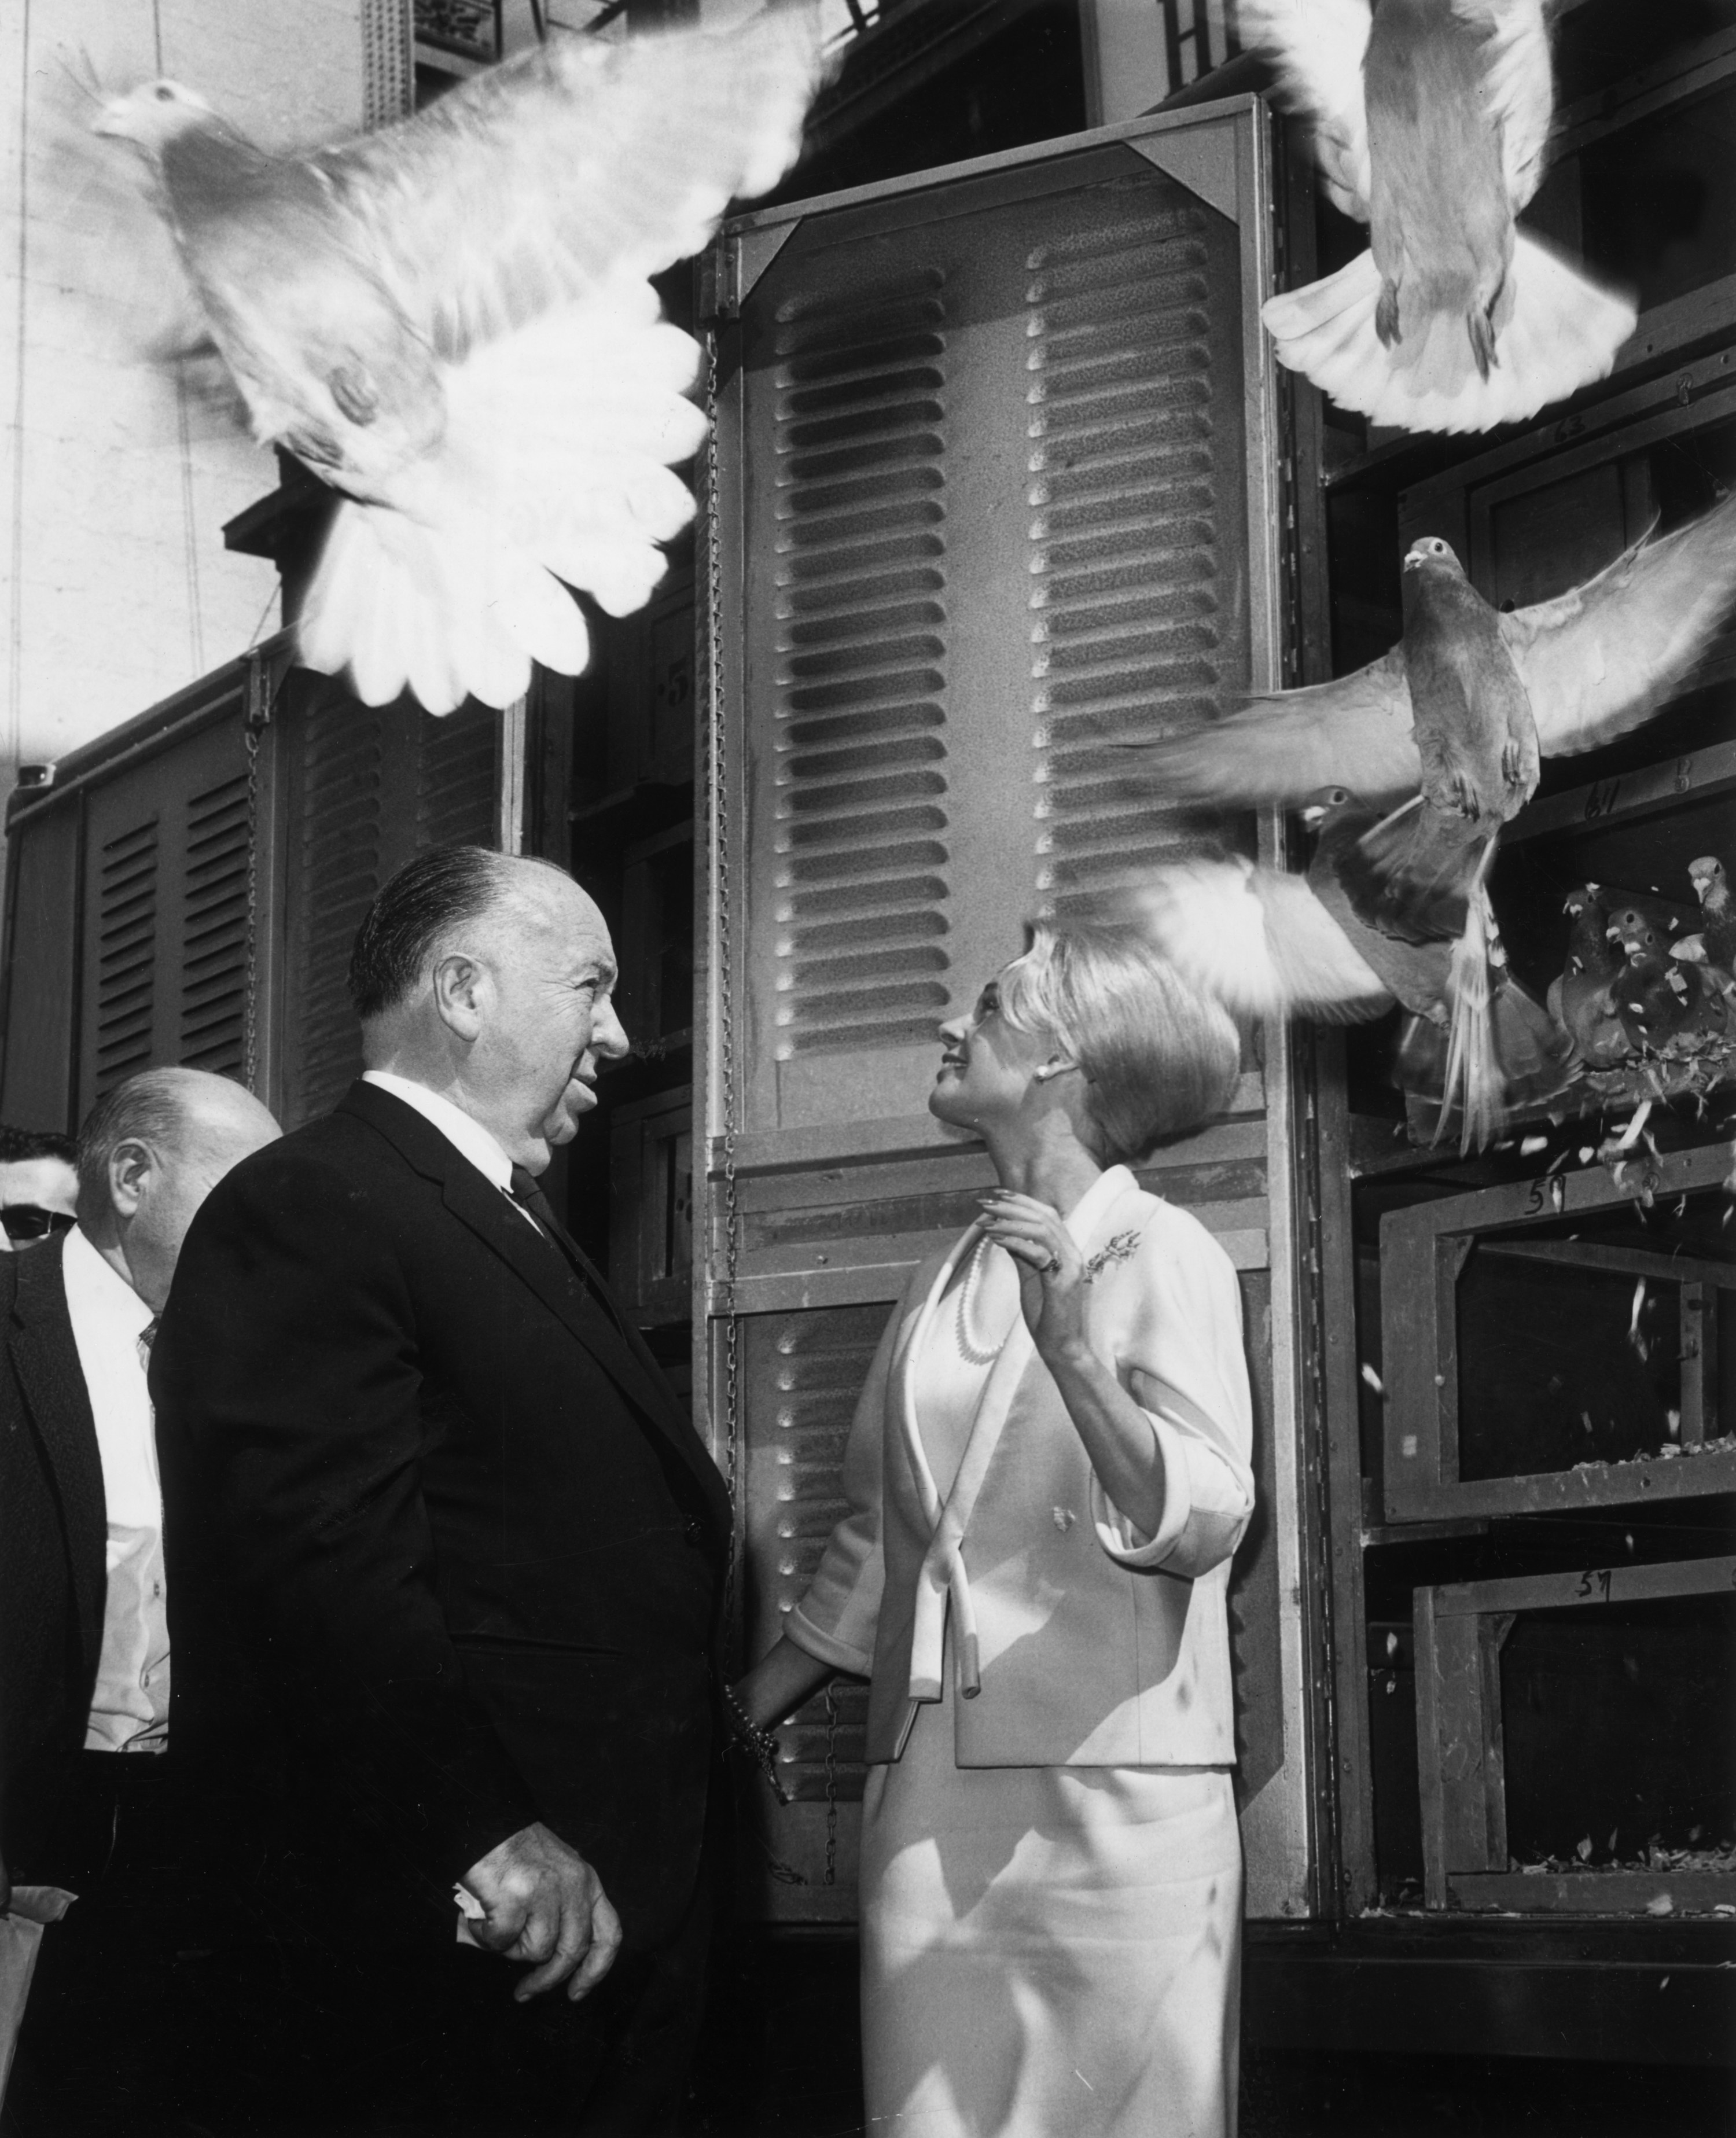 American actress Tippi Hedren and English-born film director Alfred Hitchcock (1899-1980) release 1,000 pigeons at the RKO Palace Theater in New York City